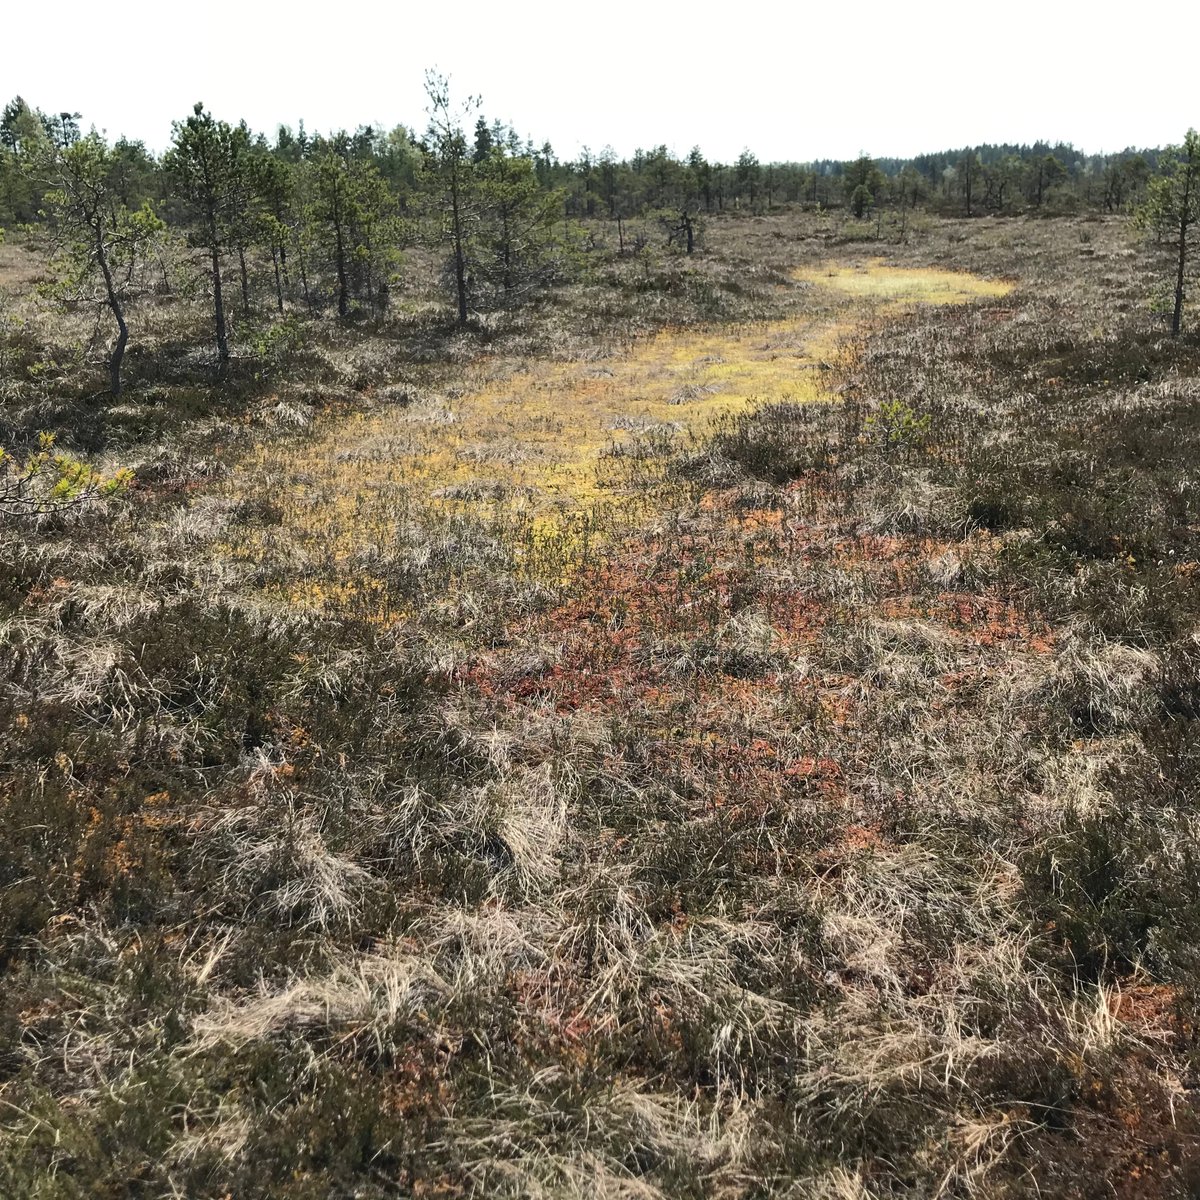 New paper: we show that S2 satellite data can be used to monitor temporal water table dynamics in restored and intact #peatlands with low tree cover. Data from Finland, Estonia, Sweden, Canada, USA. Funded by @SuomenAkatemia #NatureRestoration #EarthEngine sciencedirect.com/science/articl…